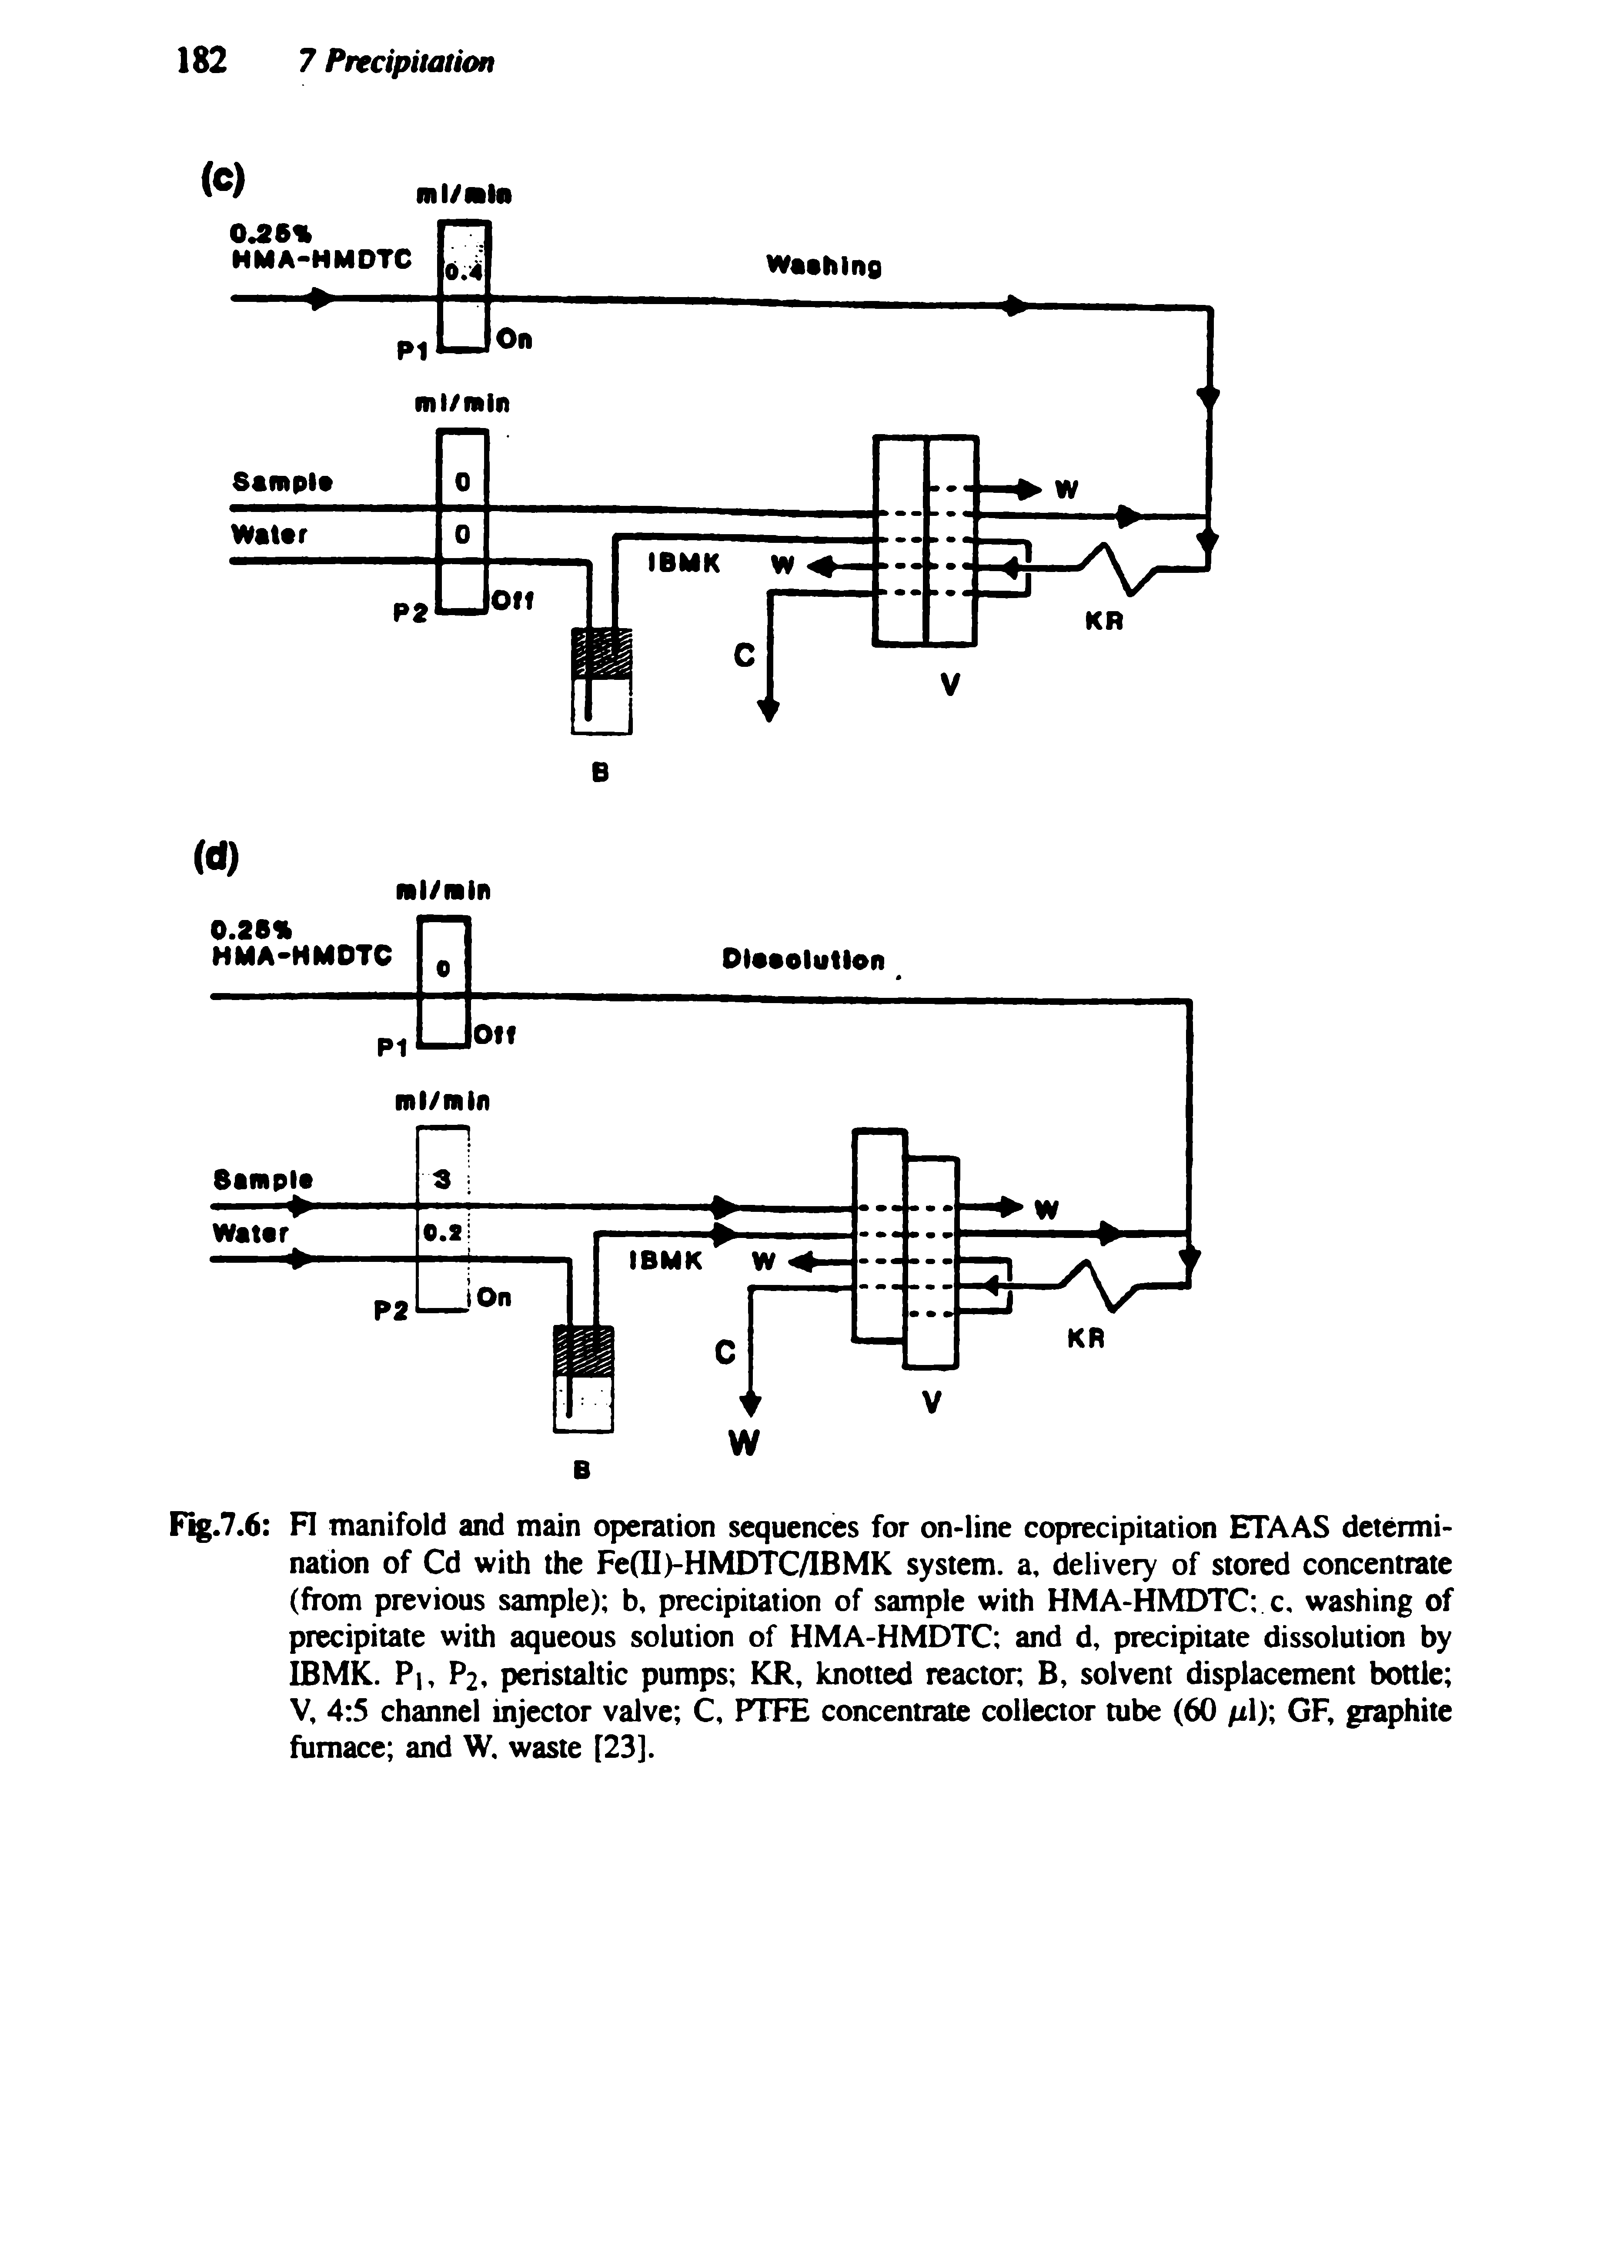 Fig.7.6 FI manifold and main operation sequences for on-line coprecipitation ETAAS determination of Cd with the Fe(U)-HMDTC/IBMK system, a, delivery of stored concentrate (from previous sample) b, precipitation of sample with HMA-HMDTC c, washing of precipitate with aqueous solution of HMA-HMDTC and d, precipitate dissolution by IBMK. Pi, P2, peristaltic pumps KR, knotted reactor, B, solvent displacement bottle V, 4 5 channel injector valve C, PTFE concentrate collector tube (60 /xl) GF, graphite furnace and W, waste [23].